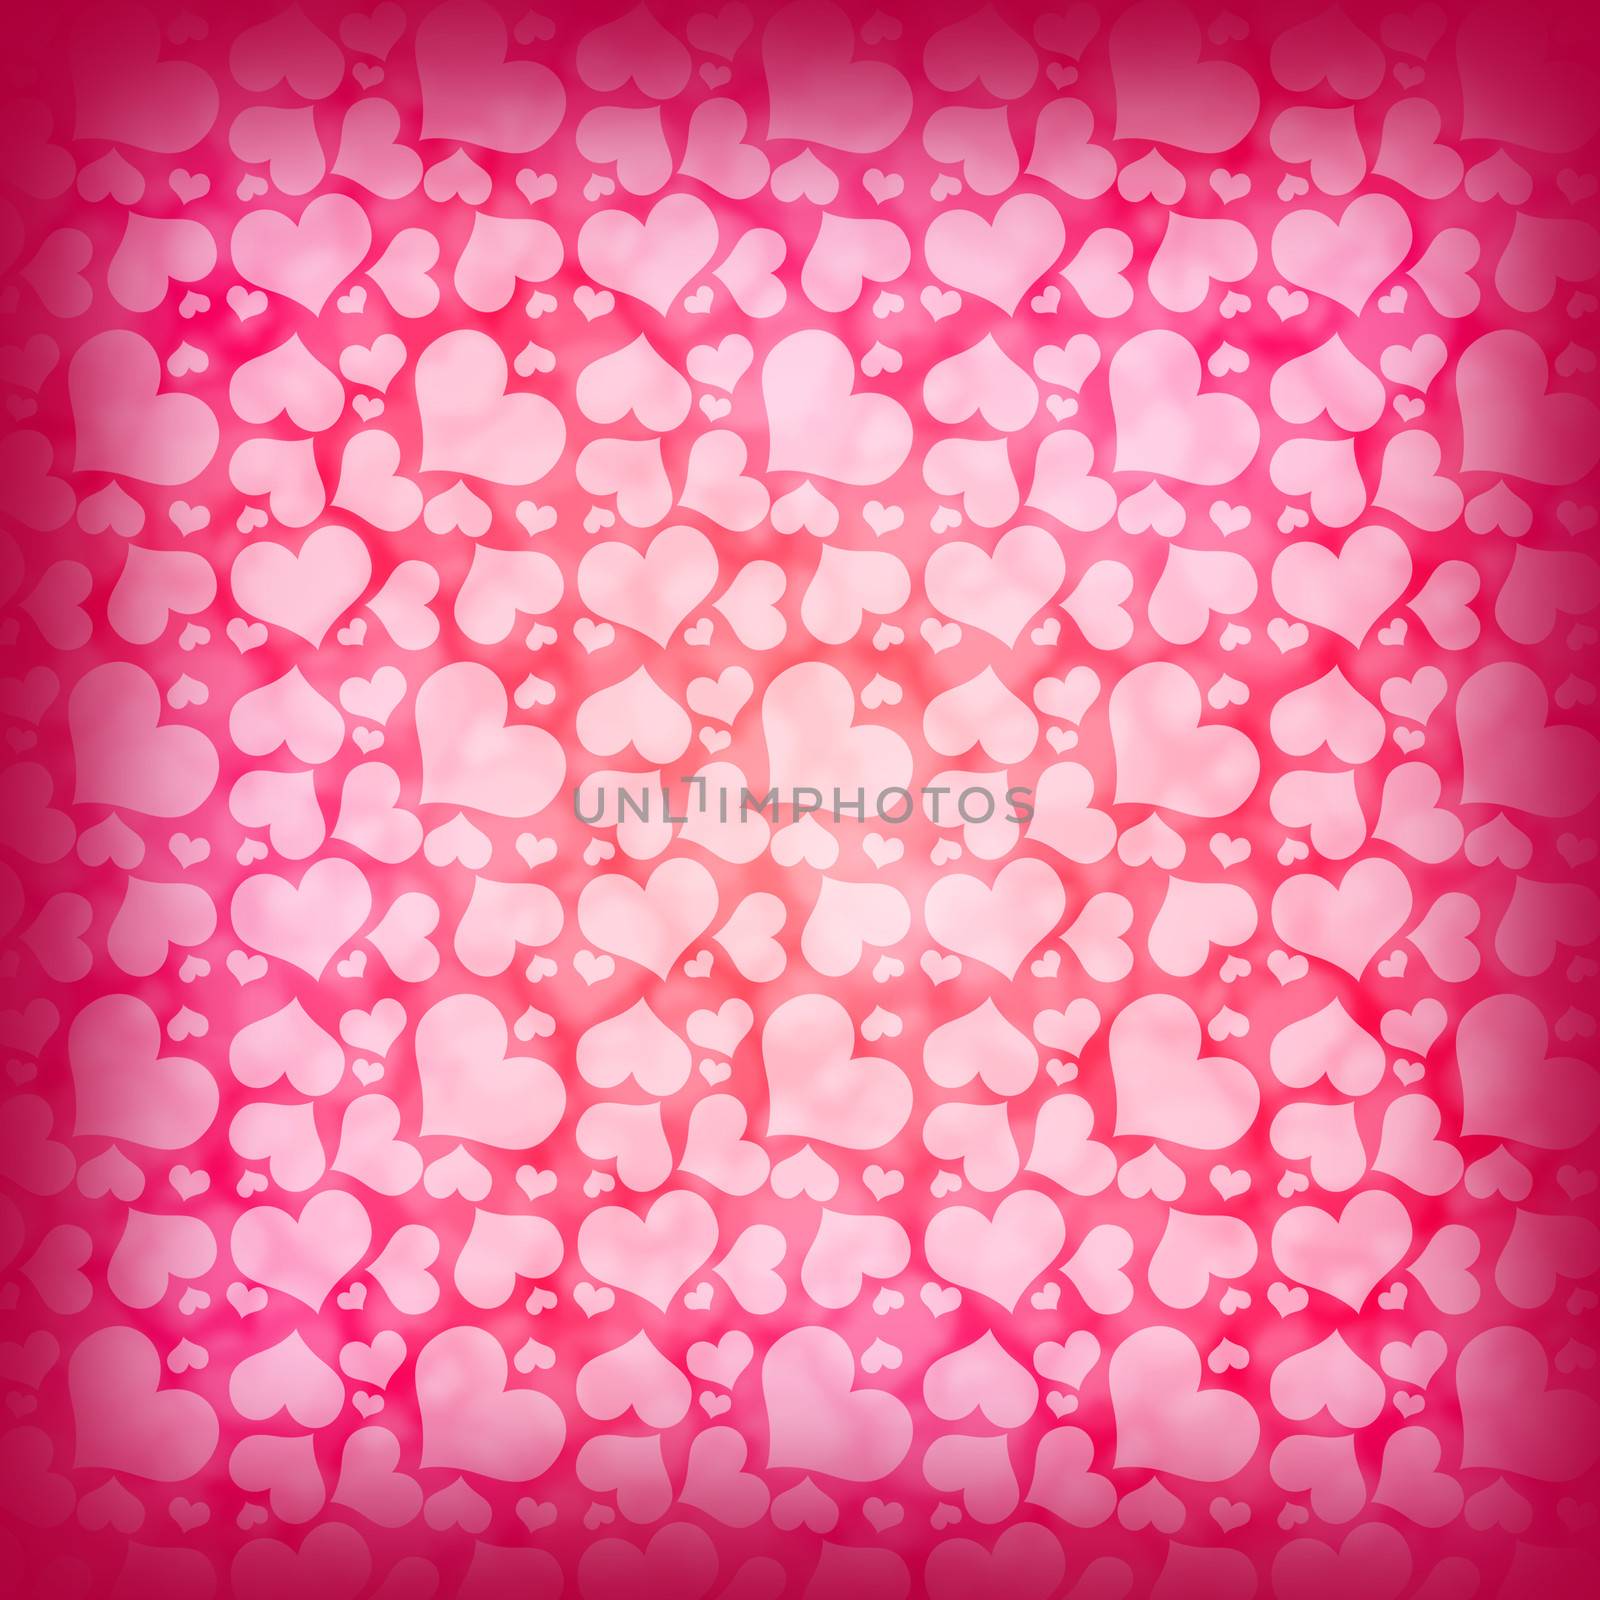 Abstract background of red hearts. The concept of Valentine's Day